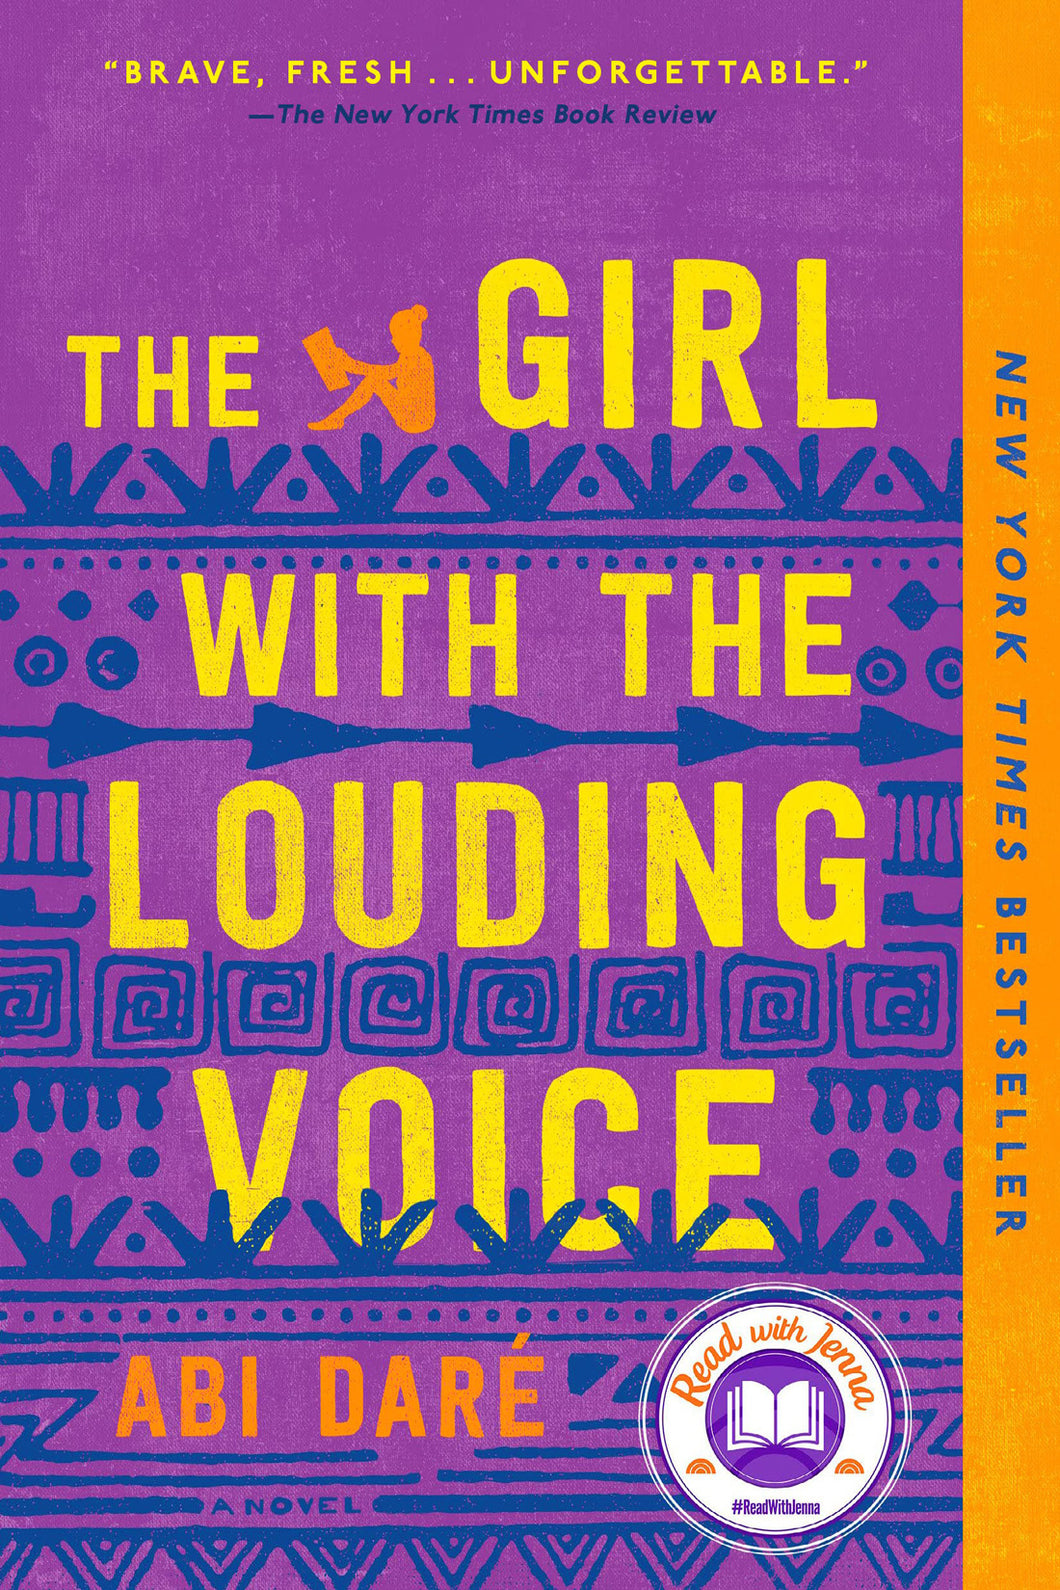 The Girl With the Louding Voice by Abi Daré / Paperback - NEW BOOK OR BOOK BOX